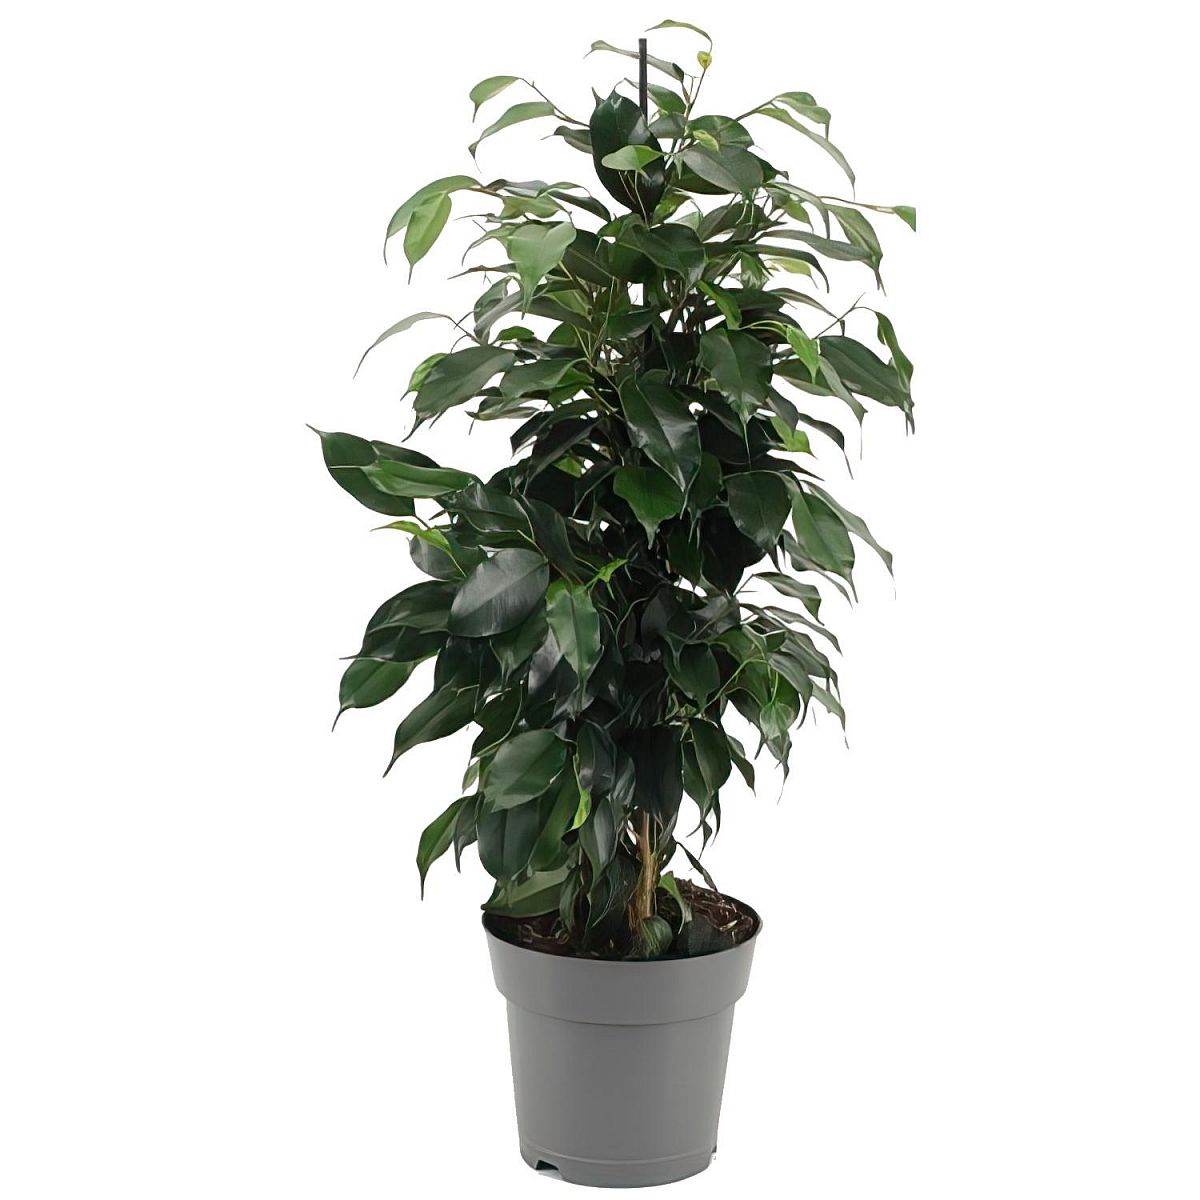 Lush Weeping Fig Weeping Fig Indoor House Plants